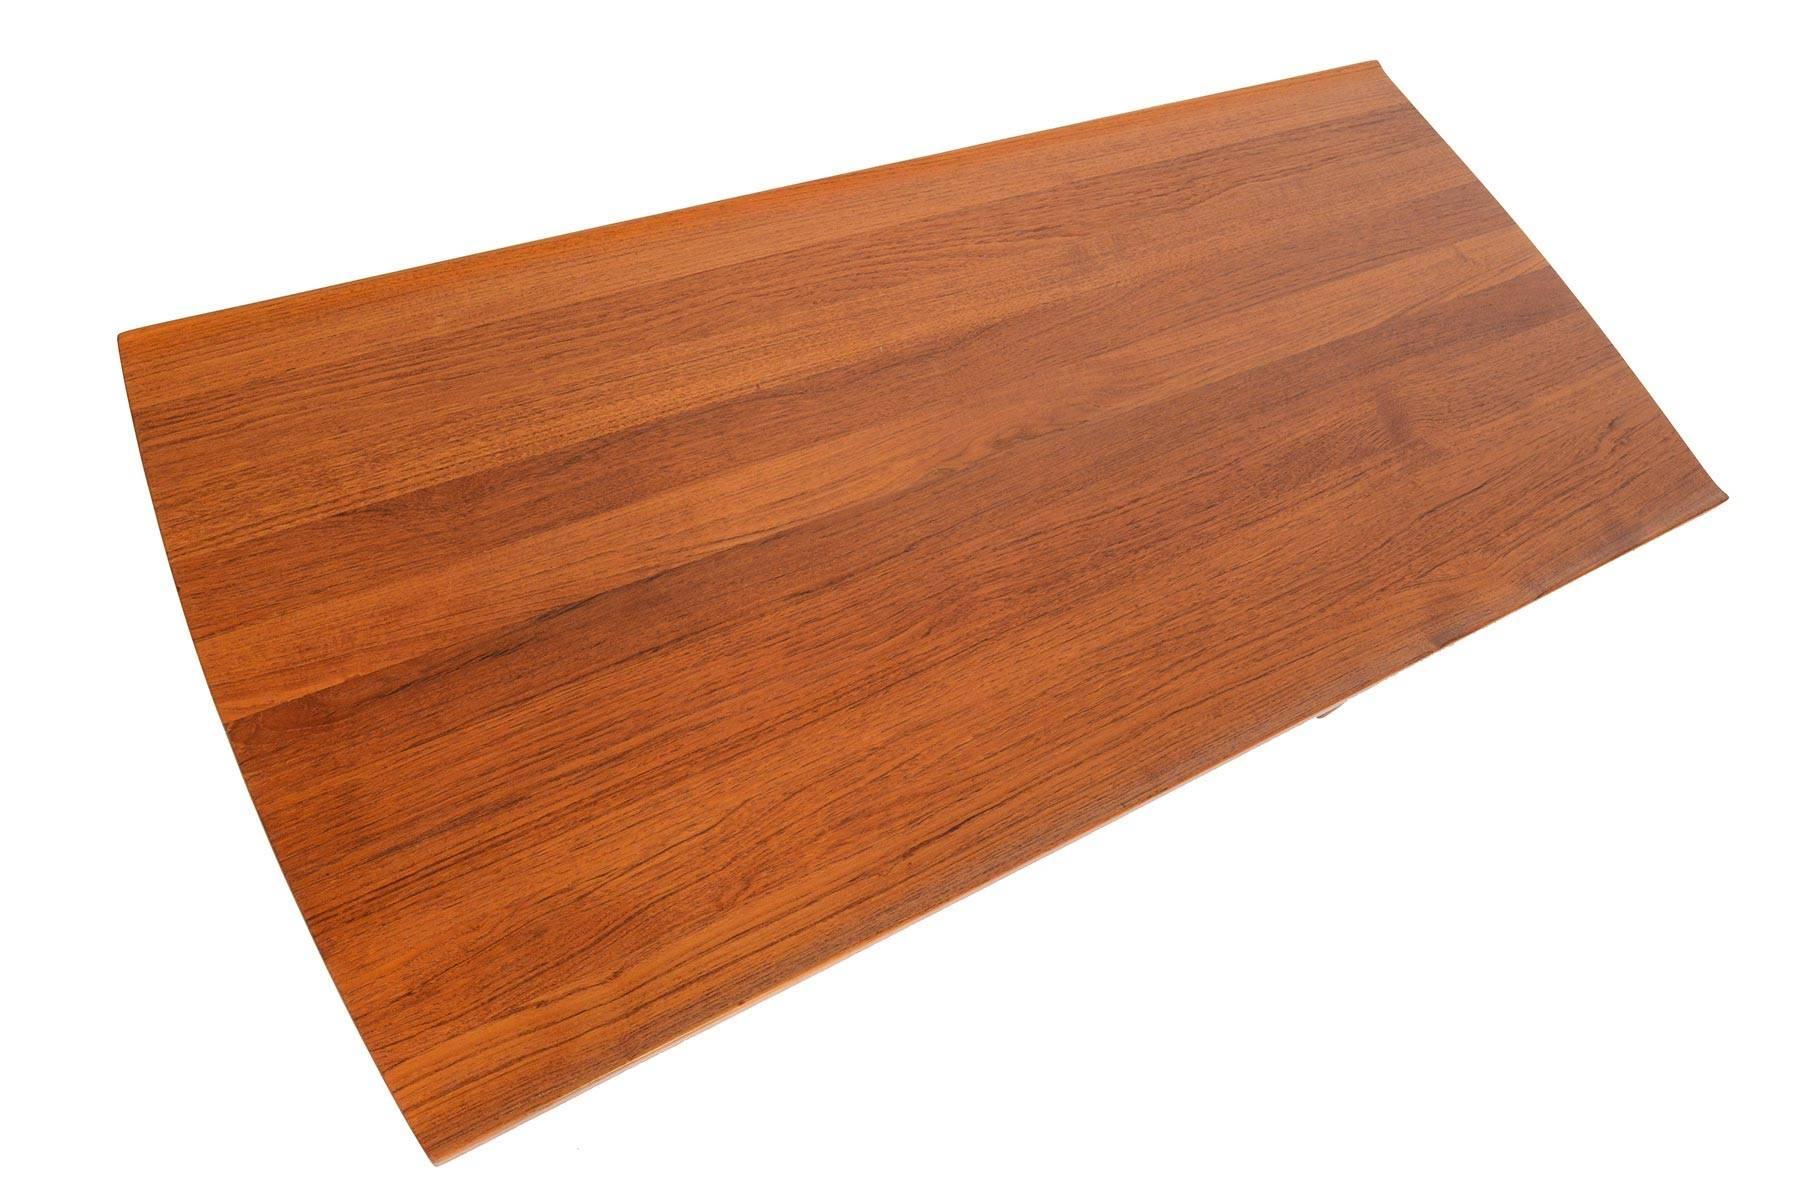 This Swedish modern midcentury coffee table is a wonderful example of high end Scandinavian craftsmanship of the 1960s. Designed by Tove & Edvard Kindt-Larsen for AB Seffle Møbelfabrik, this table is crafted in solid teak and accented with exposed